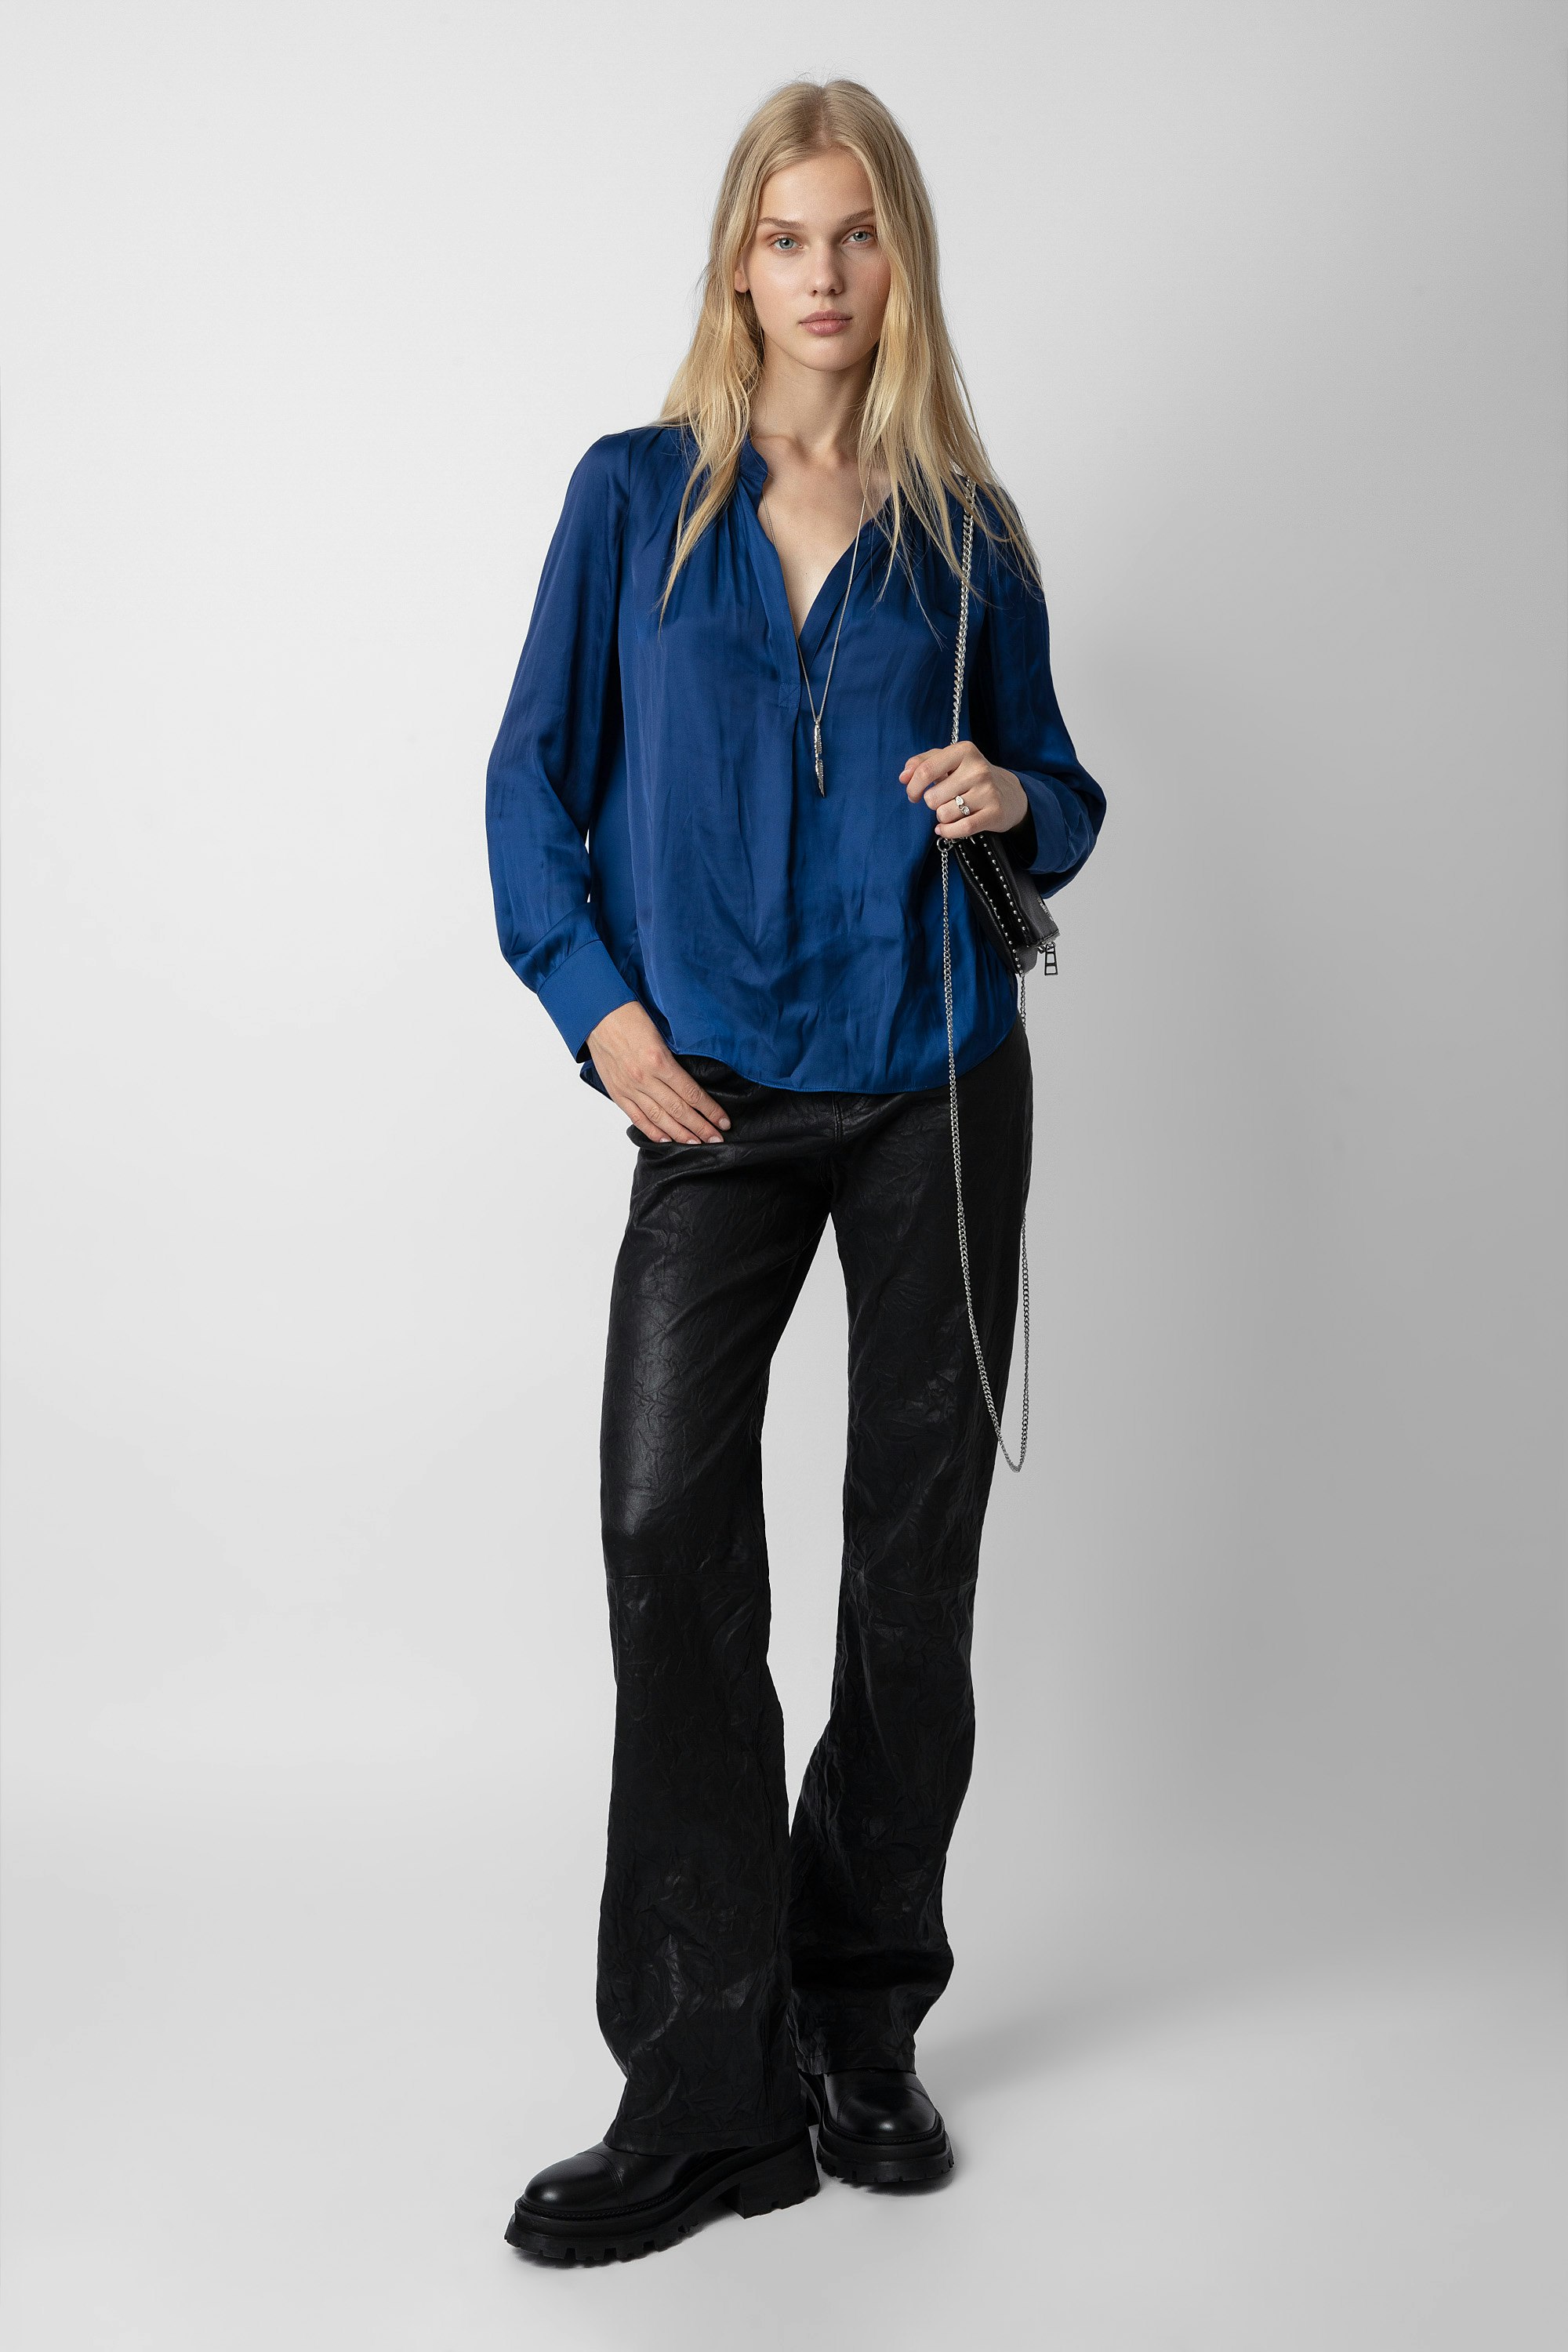 Tink Blouse - Women’s royal blue blouse with open collar.